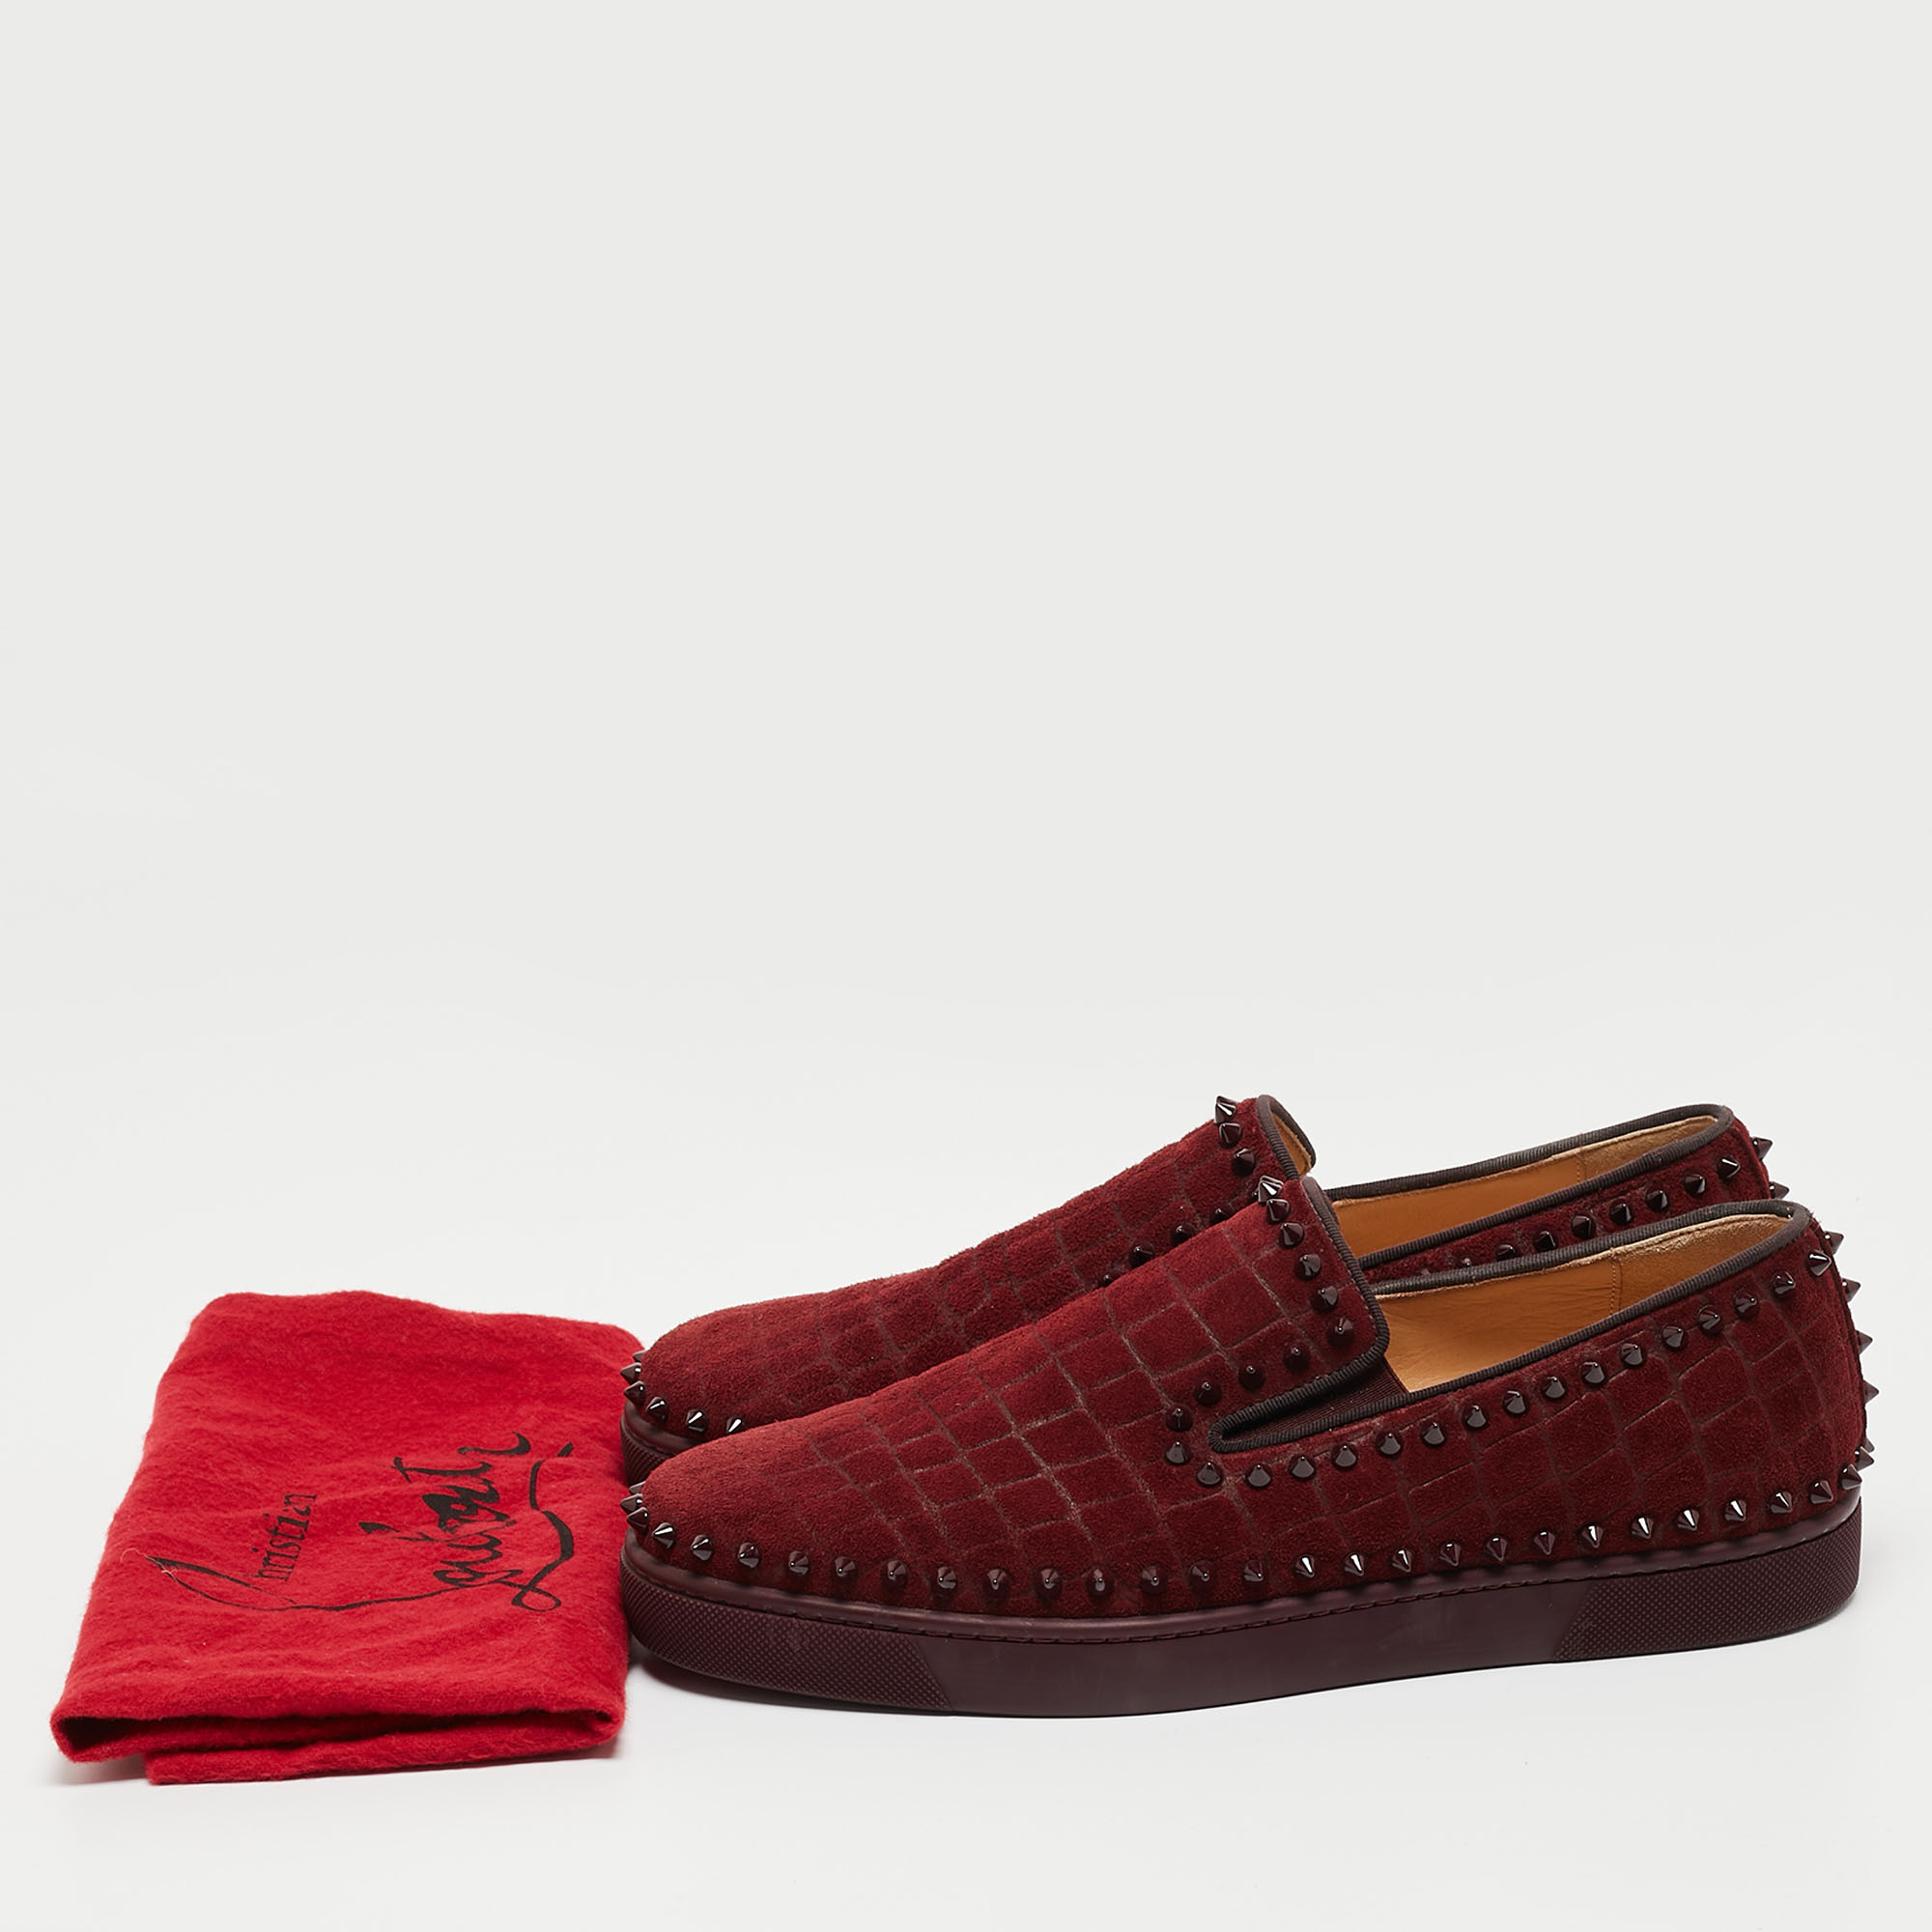 Christian Louboutin Burgundy Suede Pik Boat Slip-On Sneakers Size 42.5